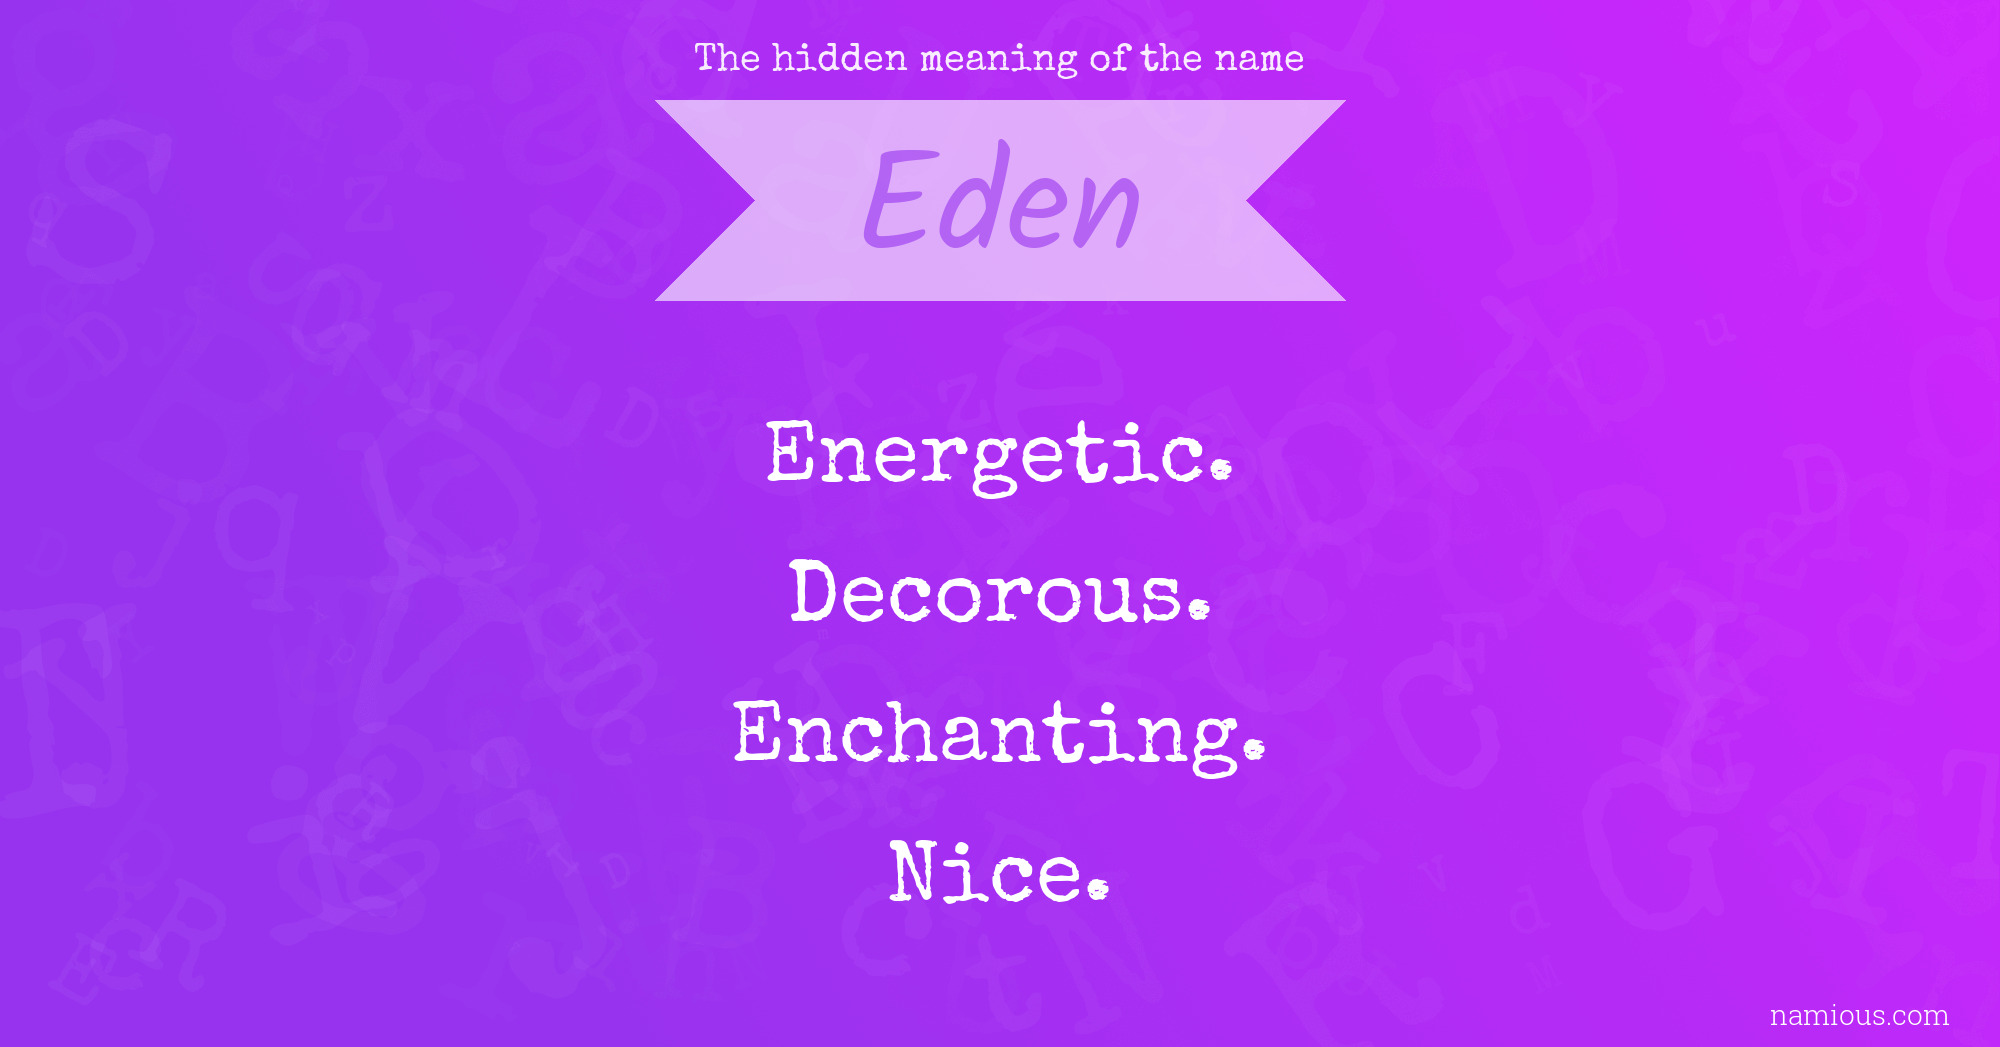 The hidden meaning of the name Eden